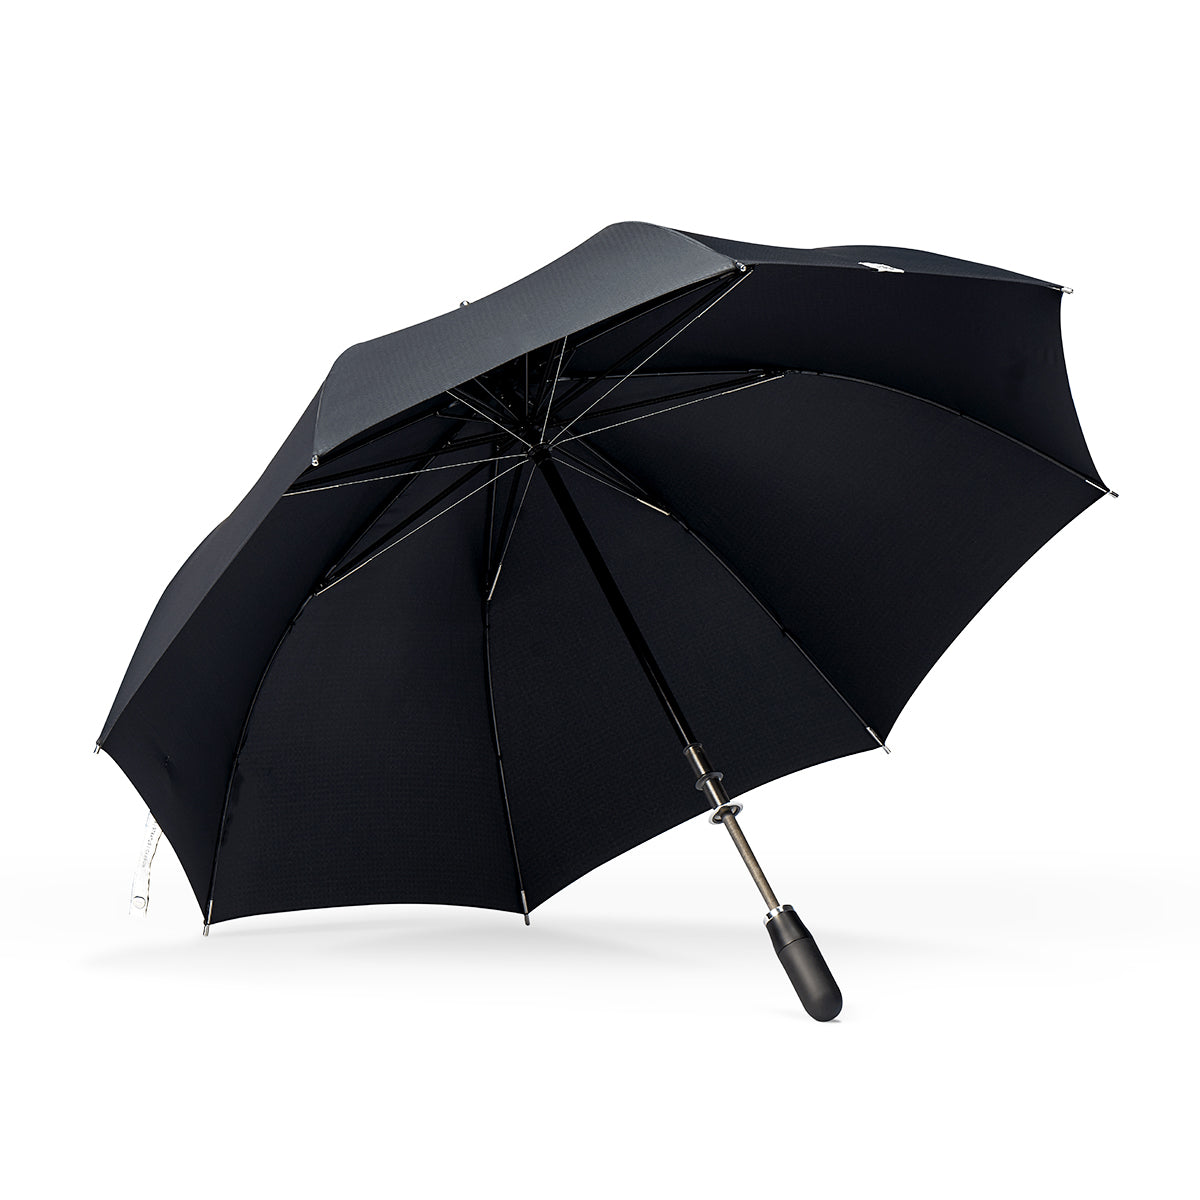 underside view of a handmade manual open luxury golf umbrella with a matte black TPR grip handle, Teflon-coated fine denier woven black polyester twill canopy, chrome trim, carbon fiber shaft, fiberglass ribs, and a reflective strap embroidered with “ShedRain Stratus.”